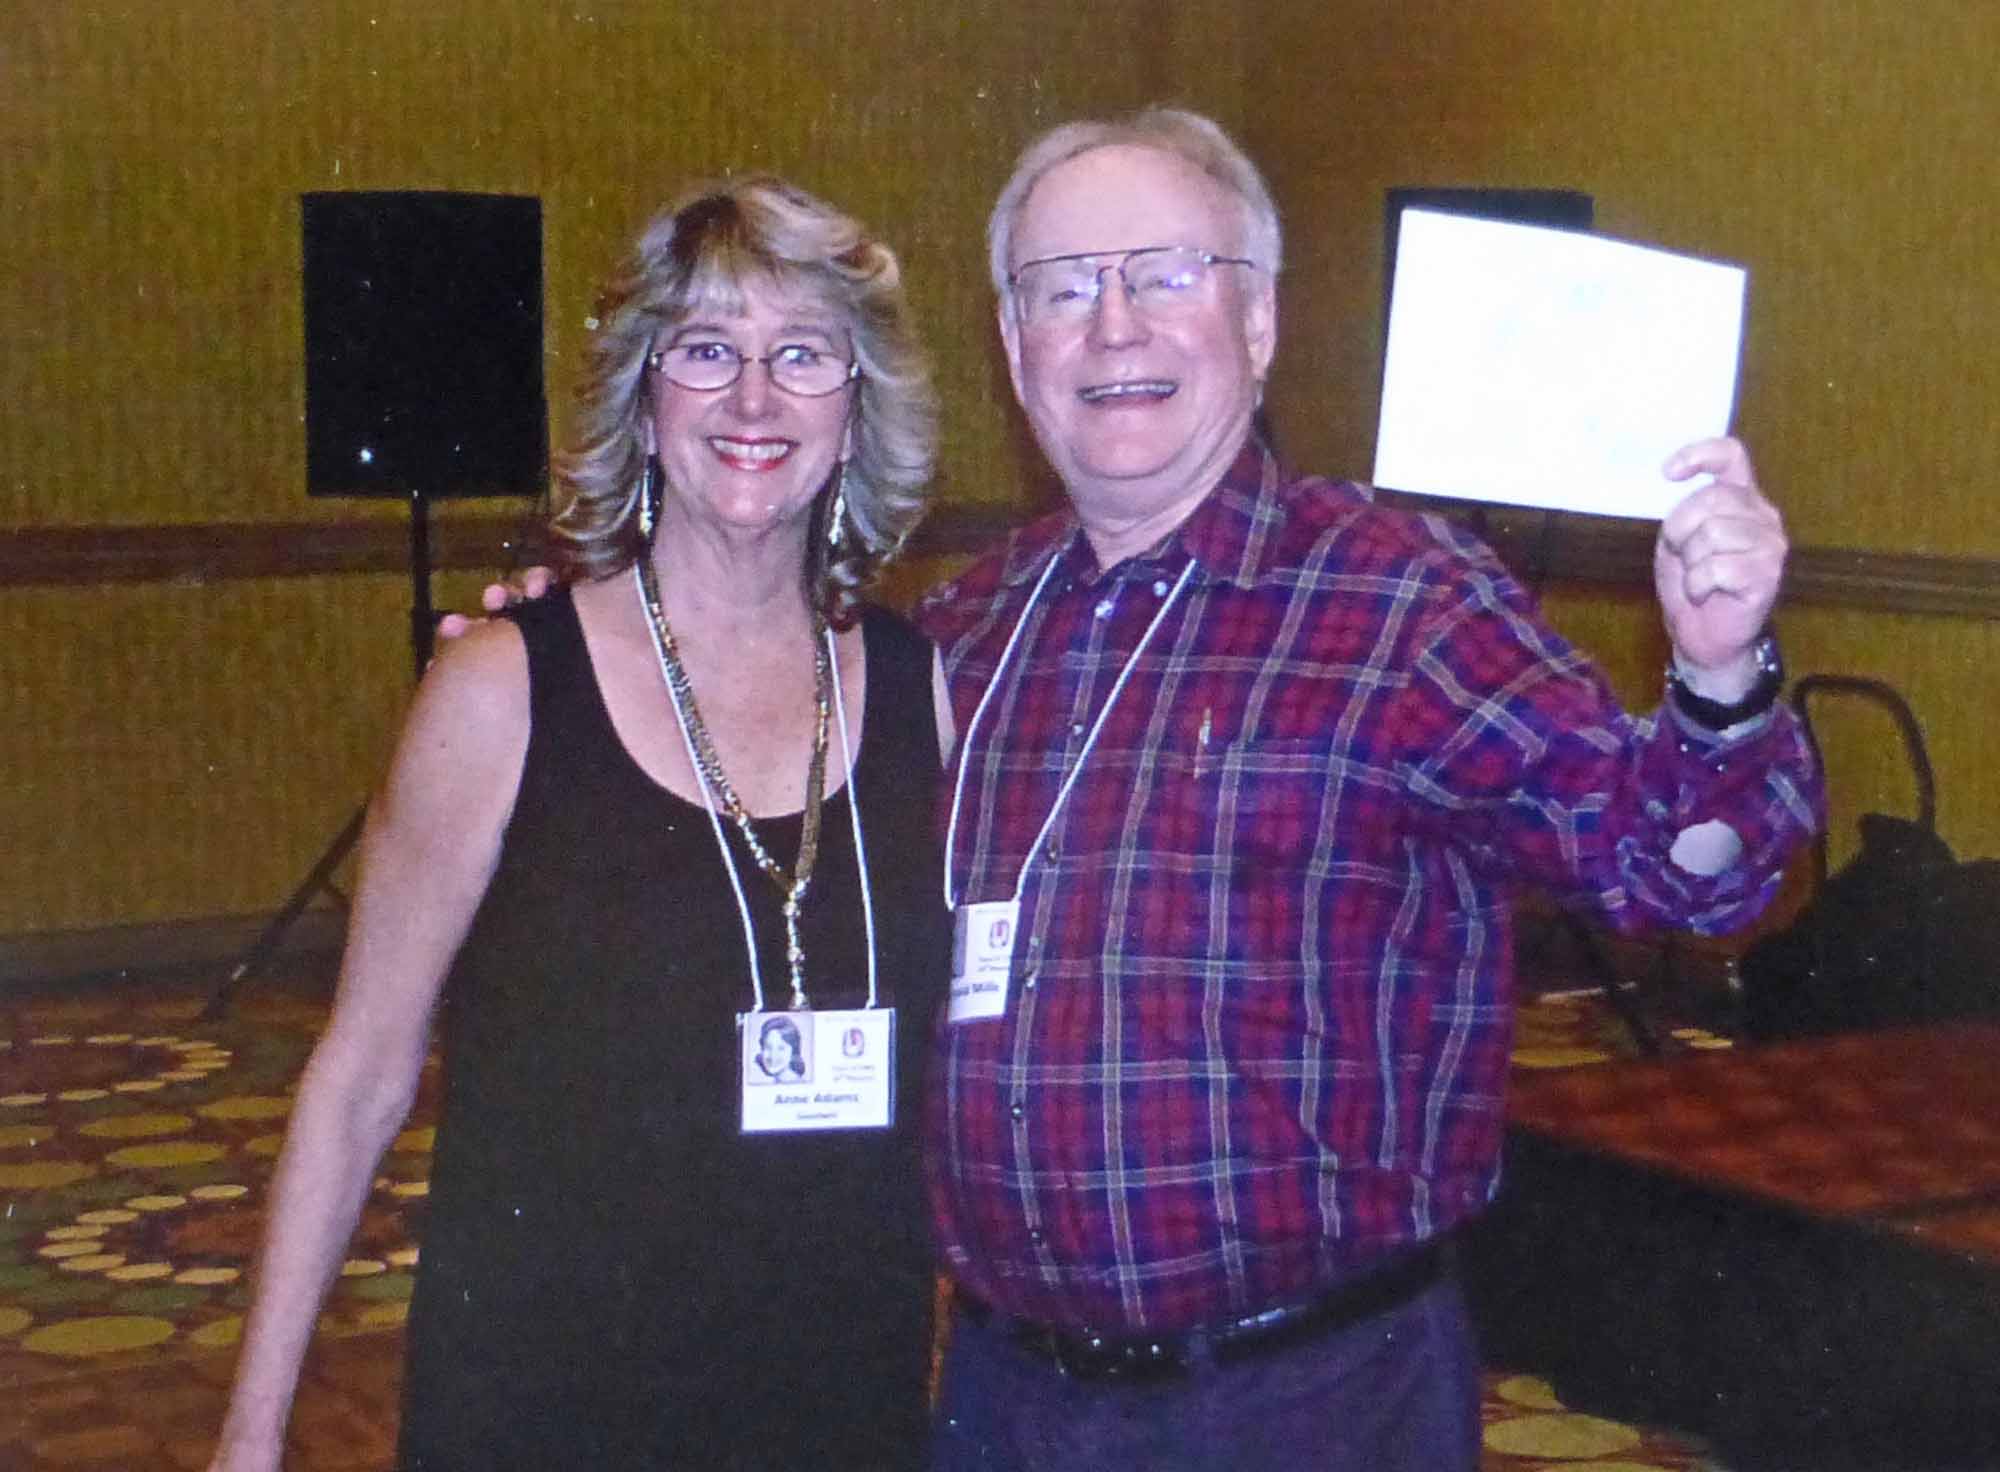 Ron Mills won a raffle prize (gift certificate) awarded by Anne Adams Goodwin